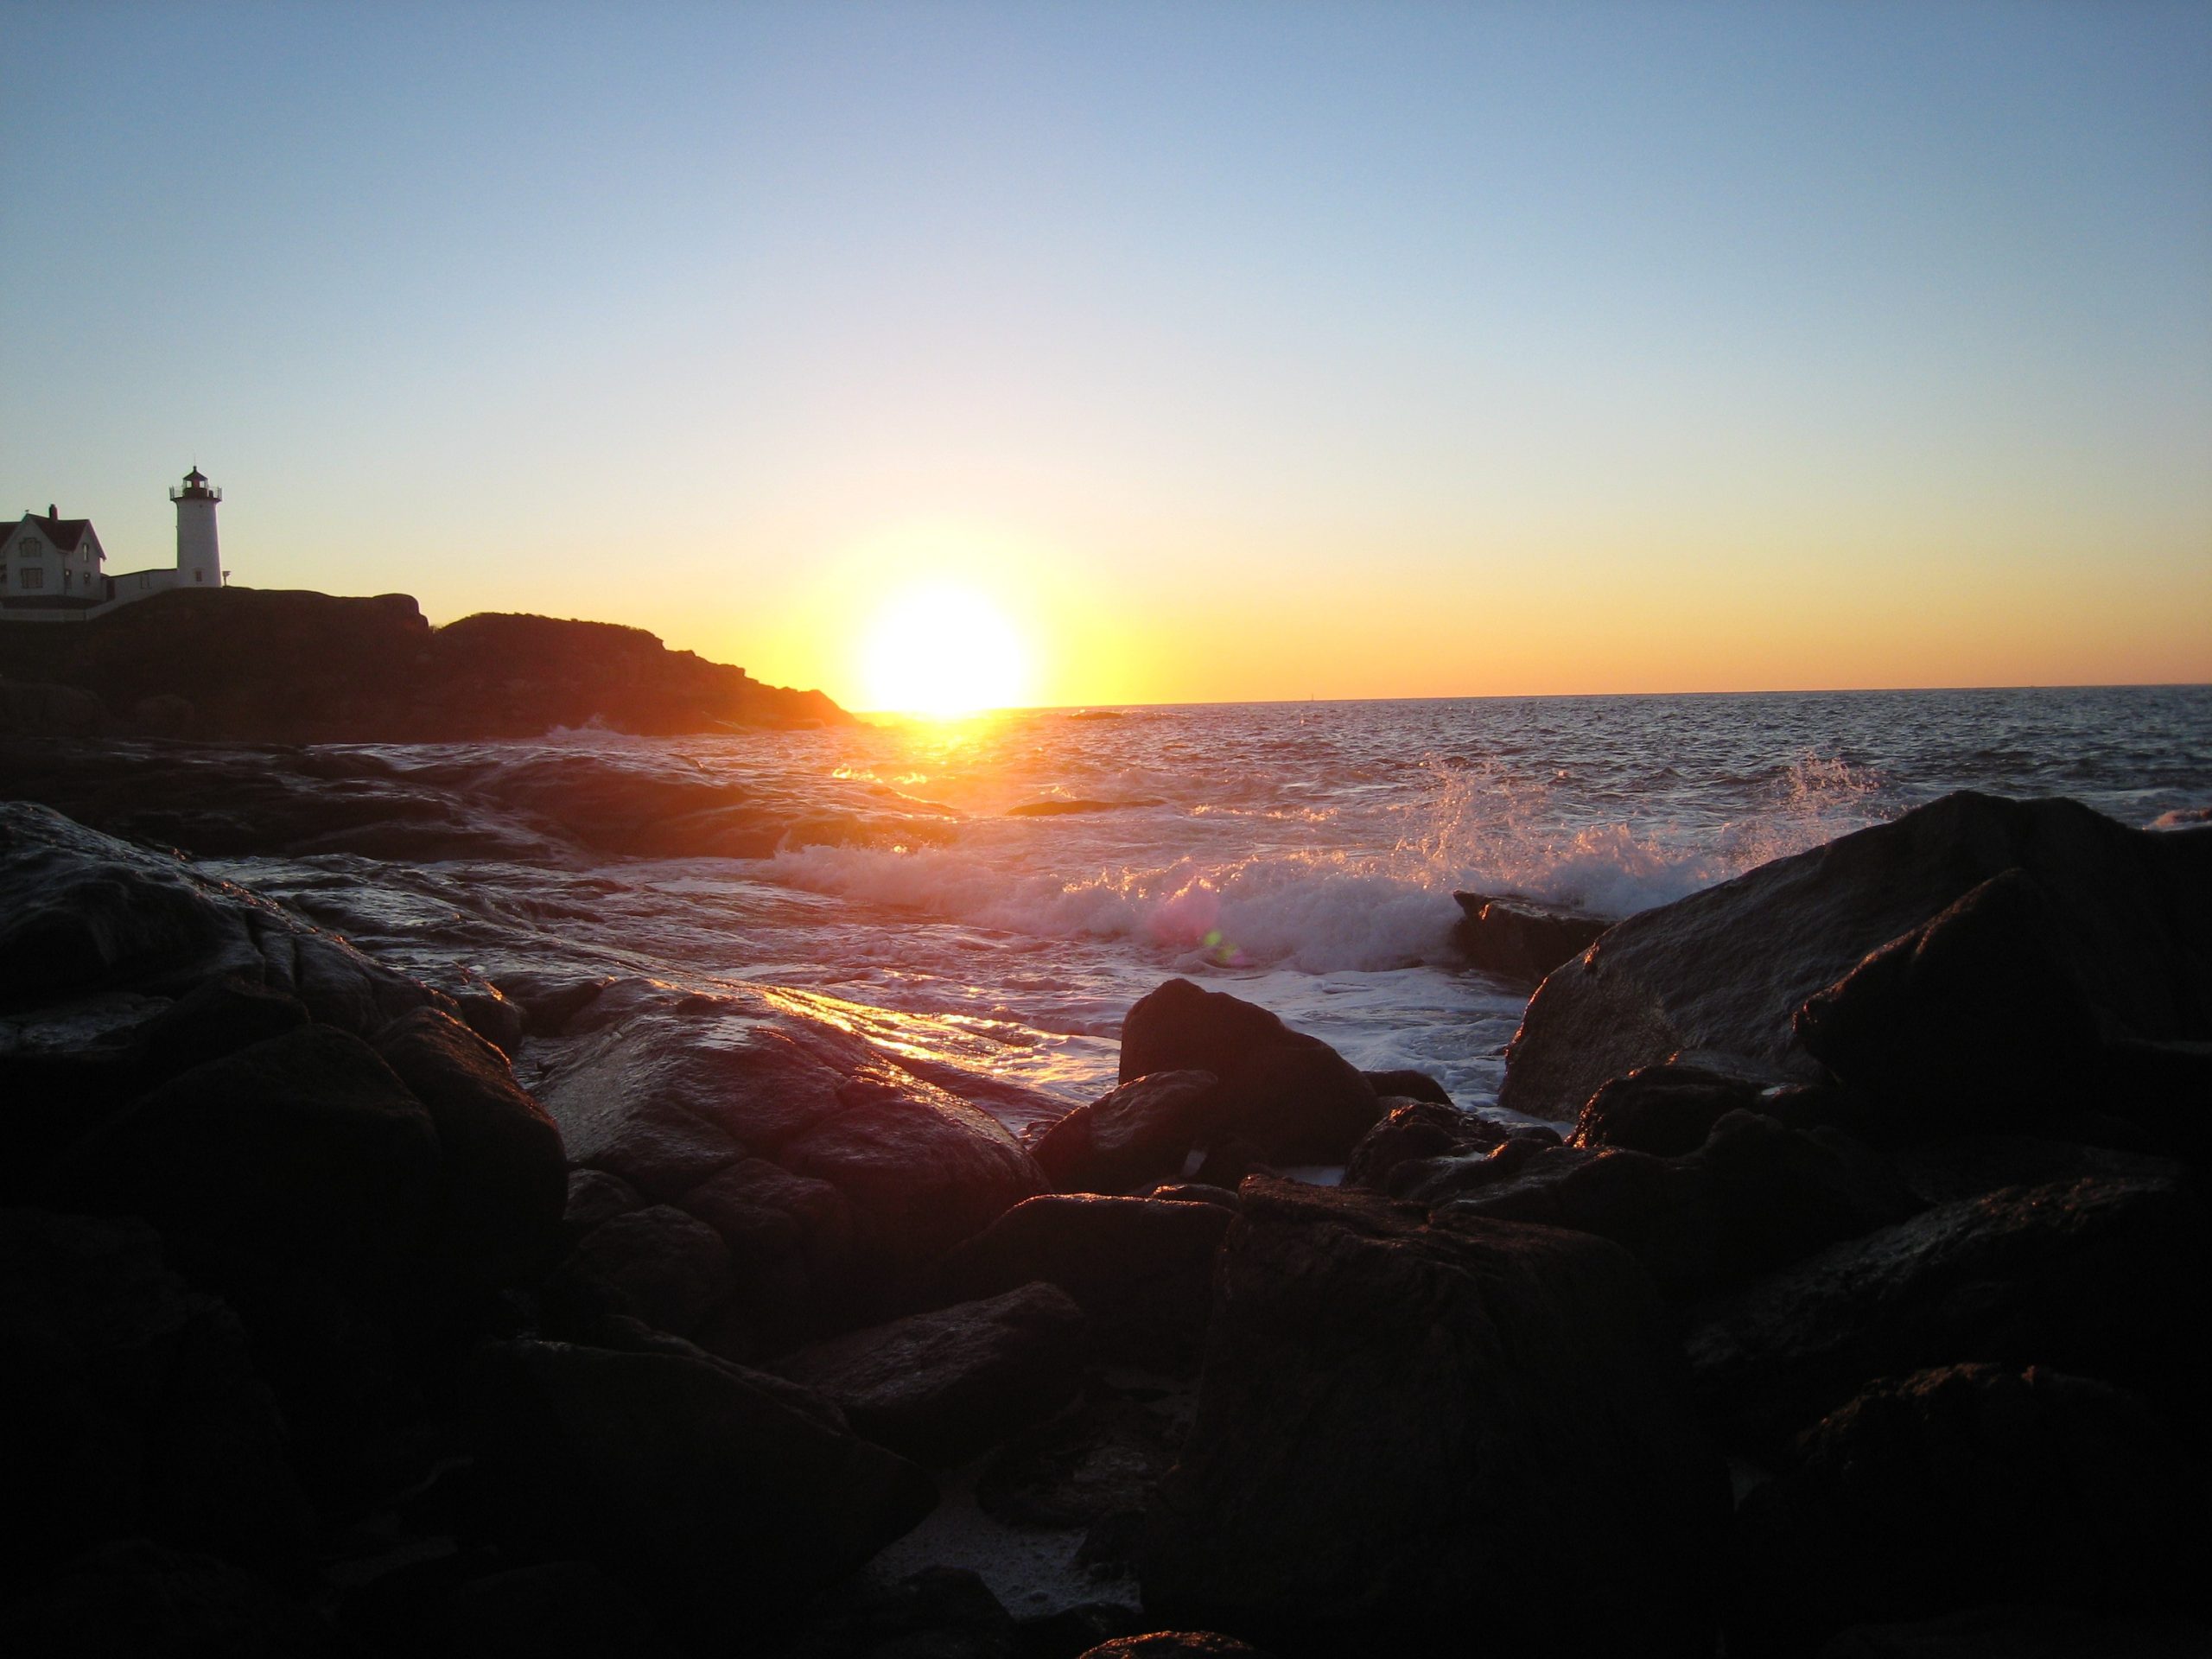 Early Morning, Nubble Light  (user submitted)